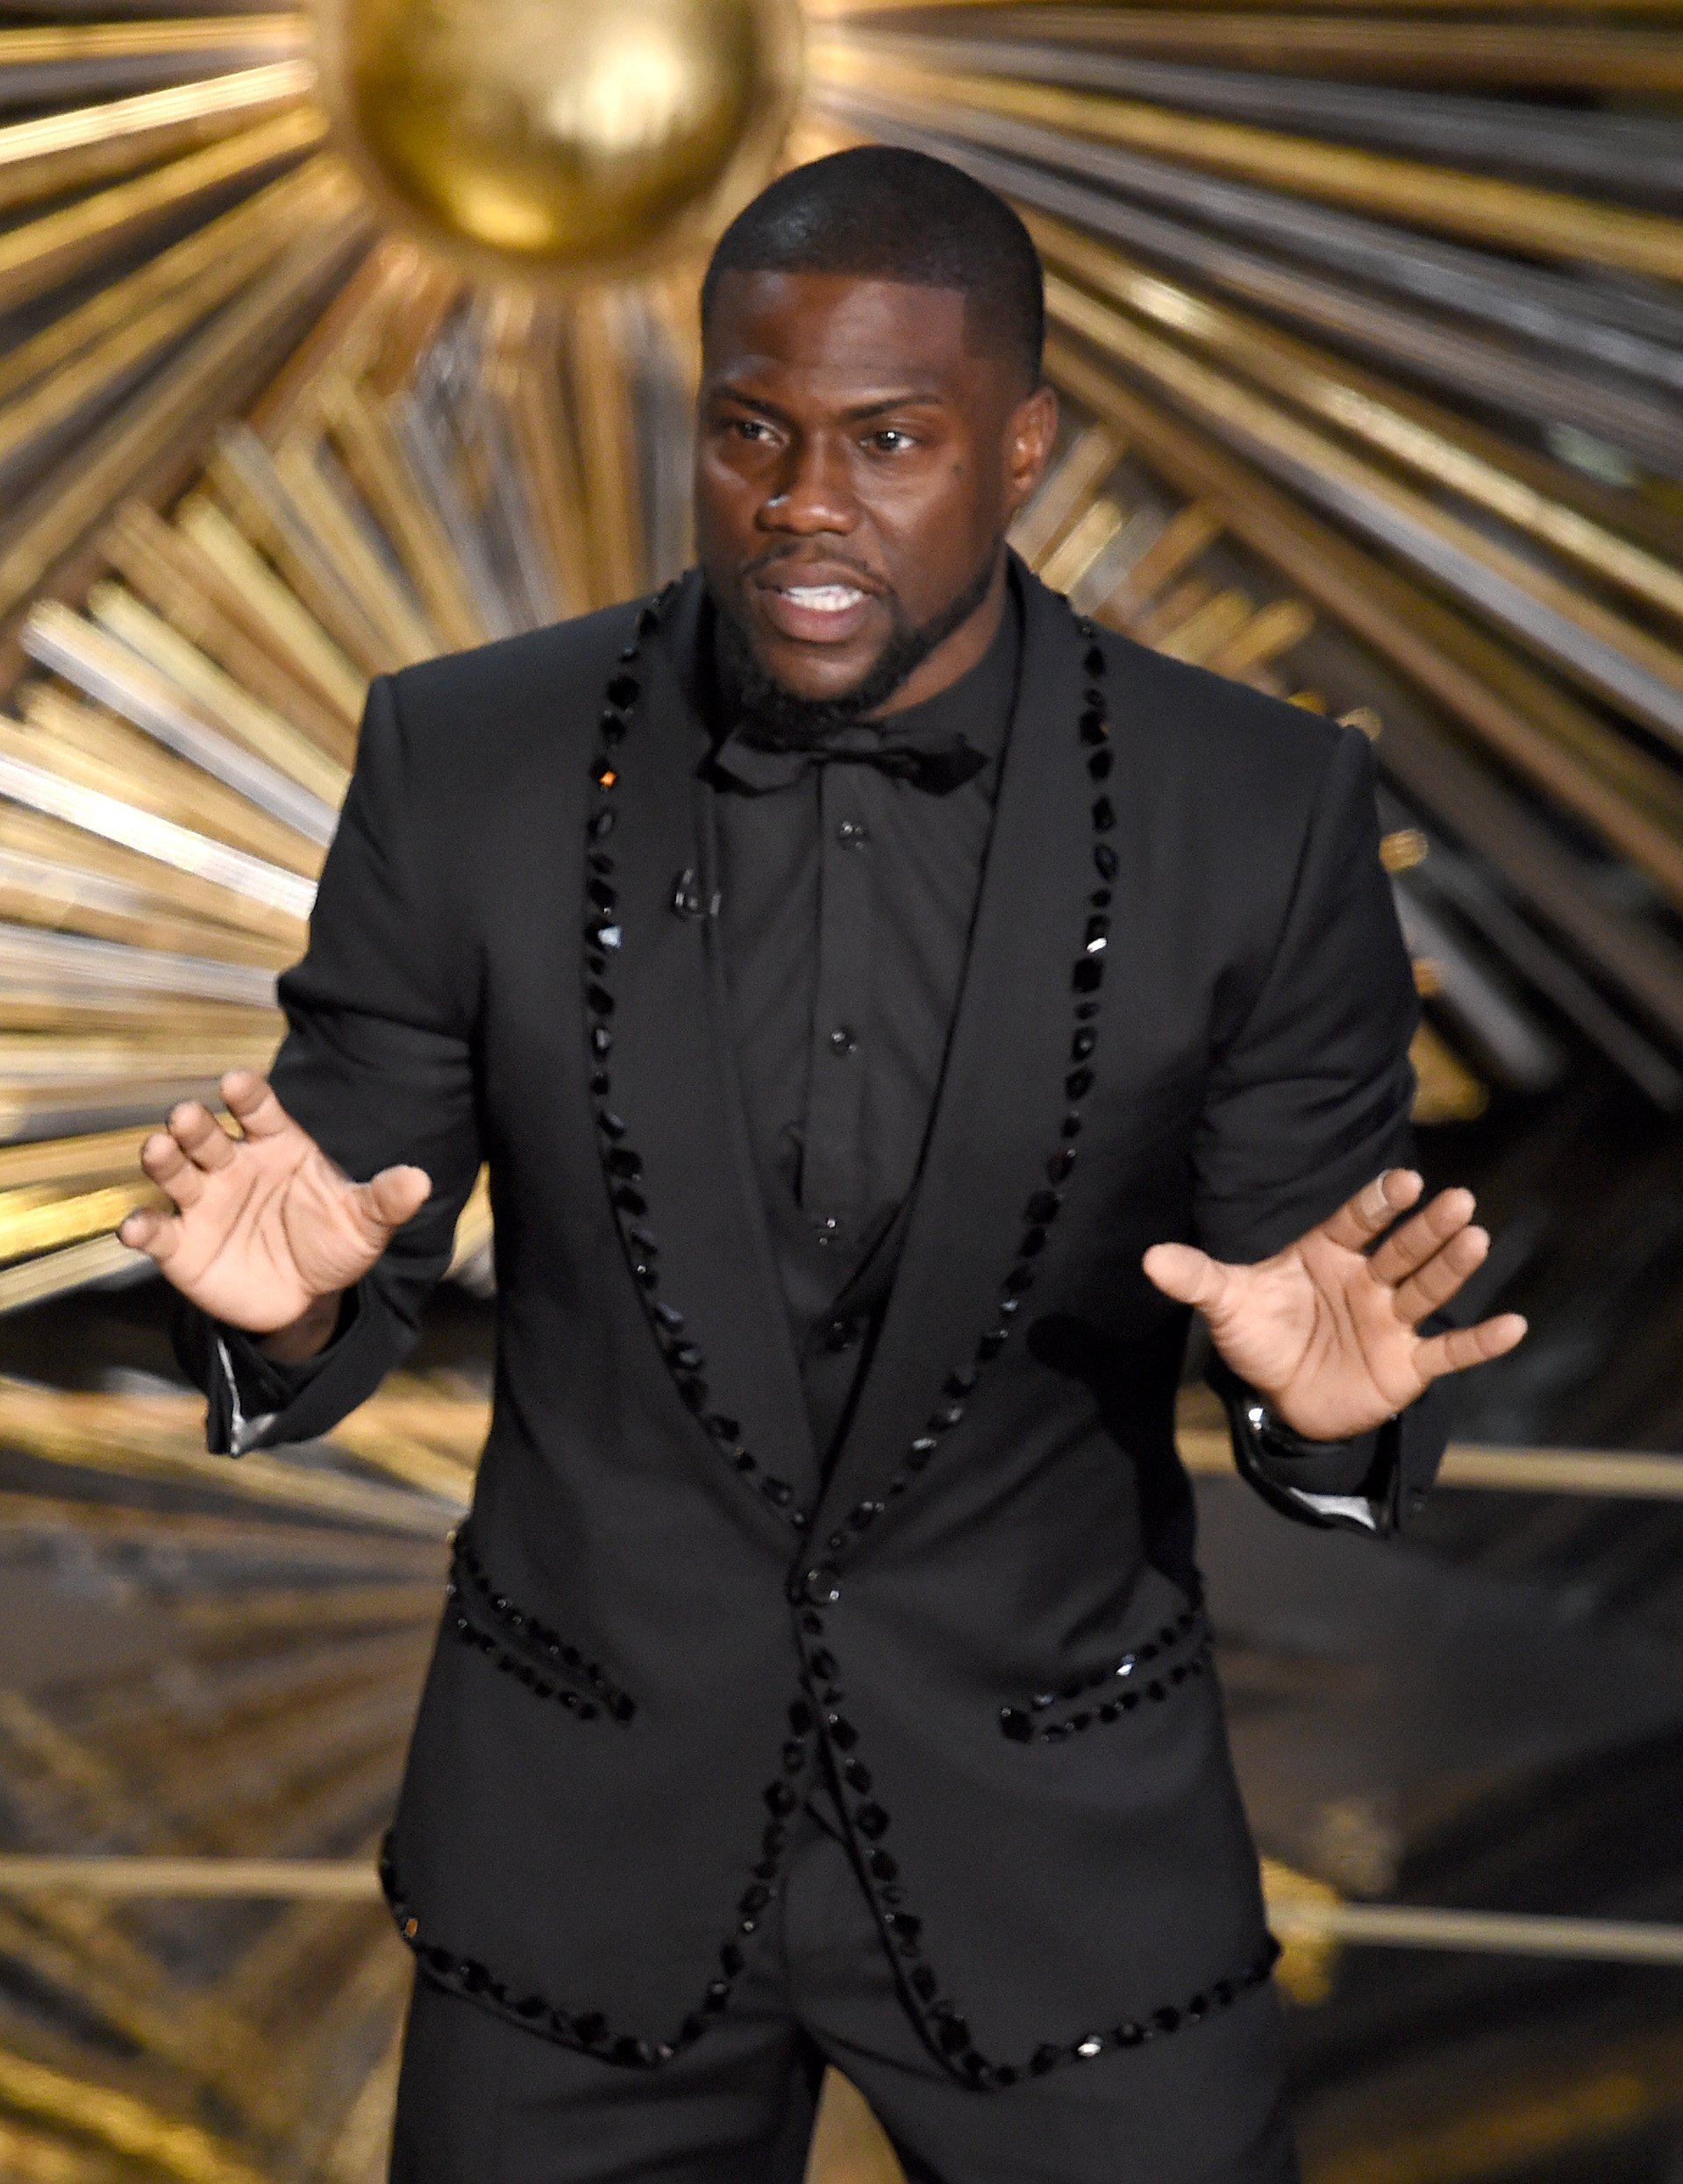 Kevin Hart at the 88th Annual Academy Awards on Feb. 28, 2016. | Photo: Getty Images